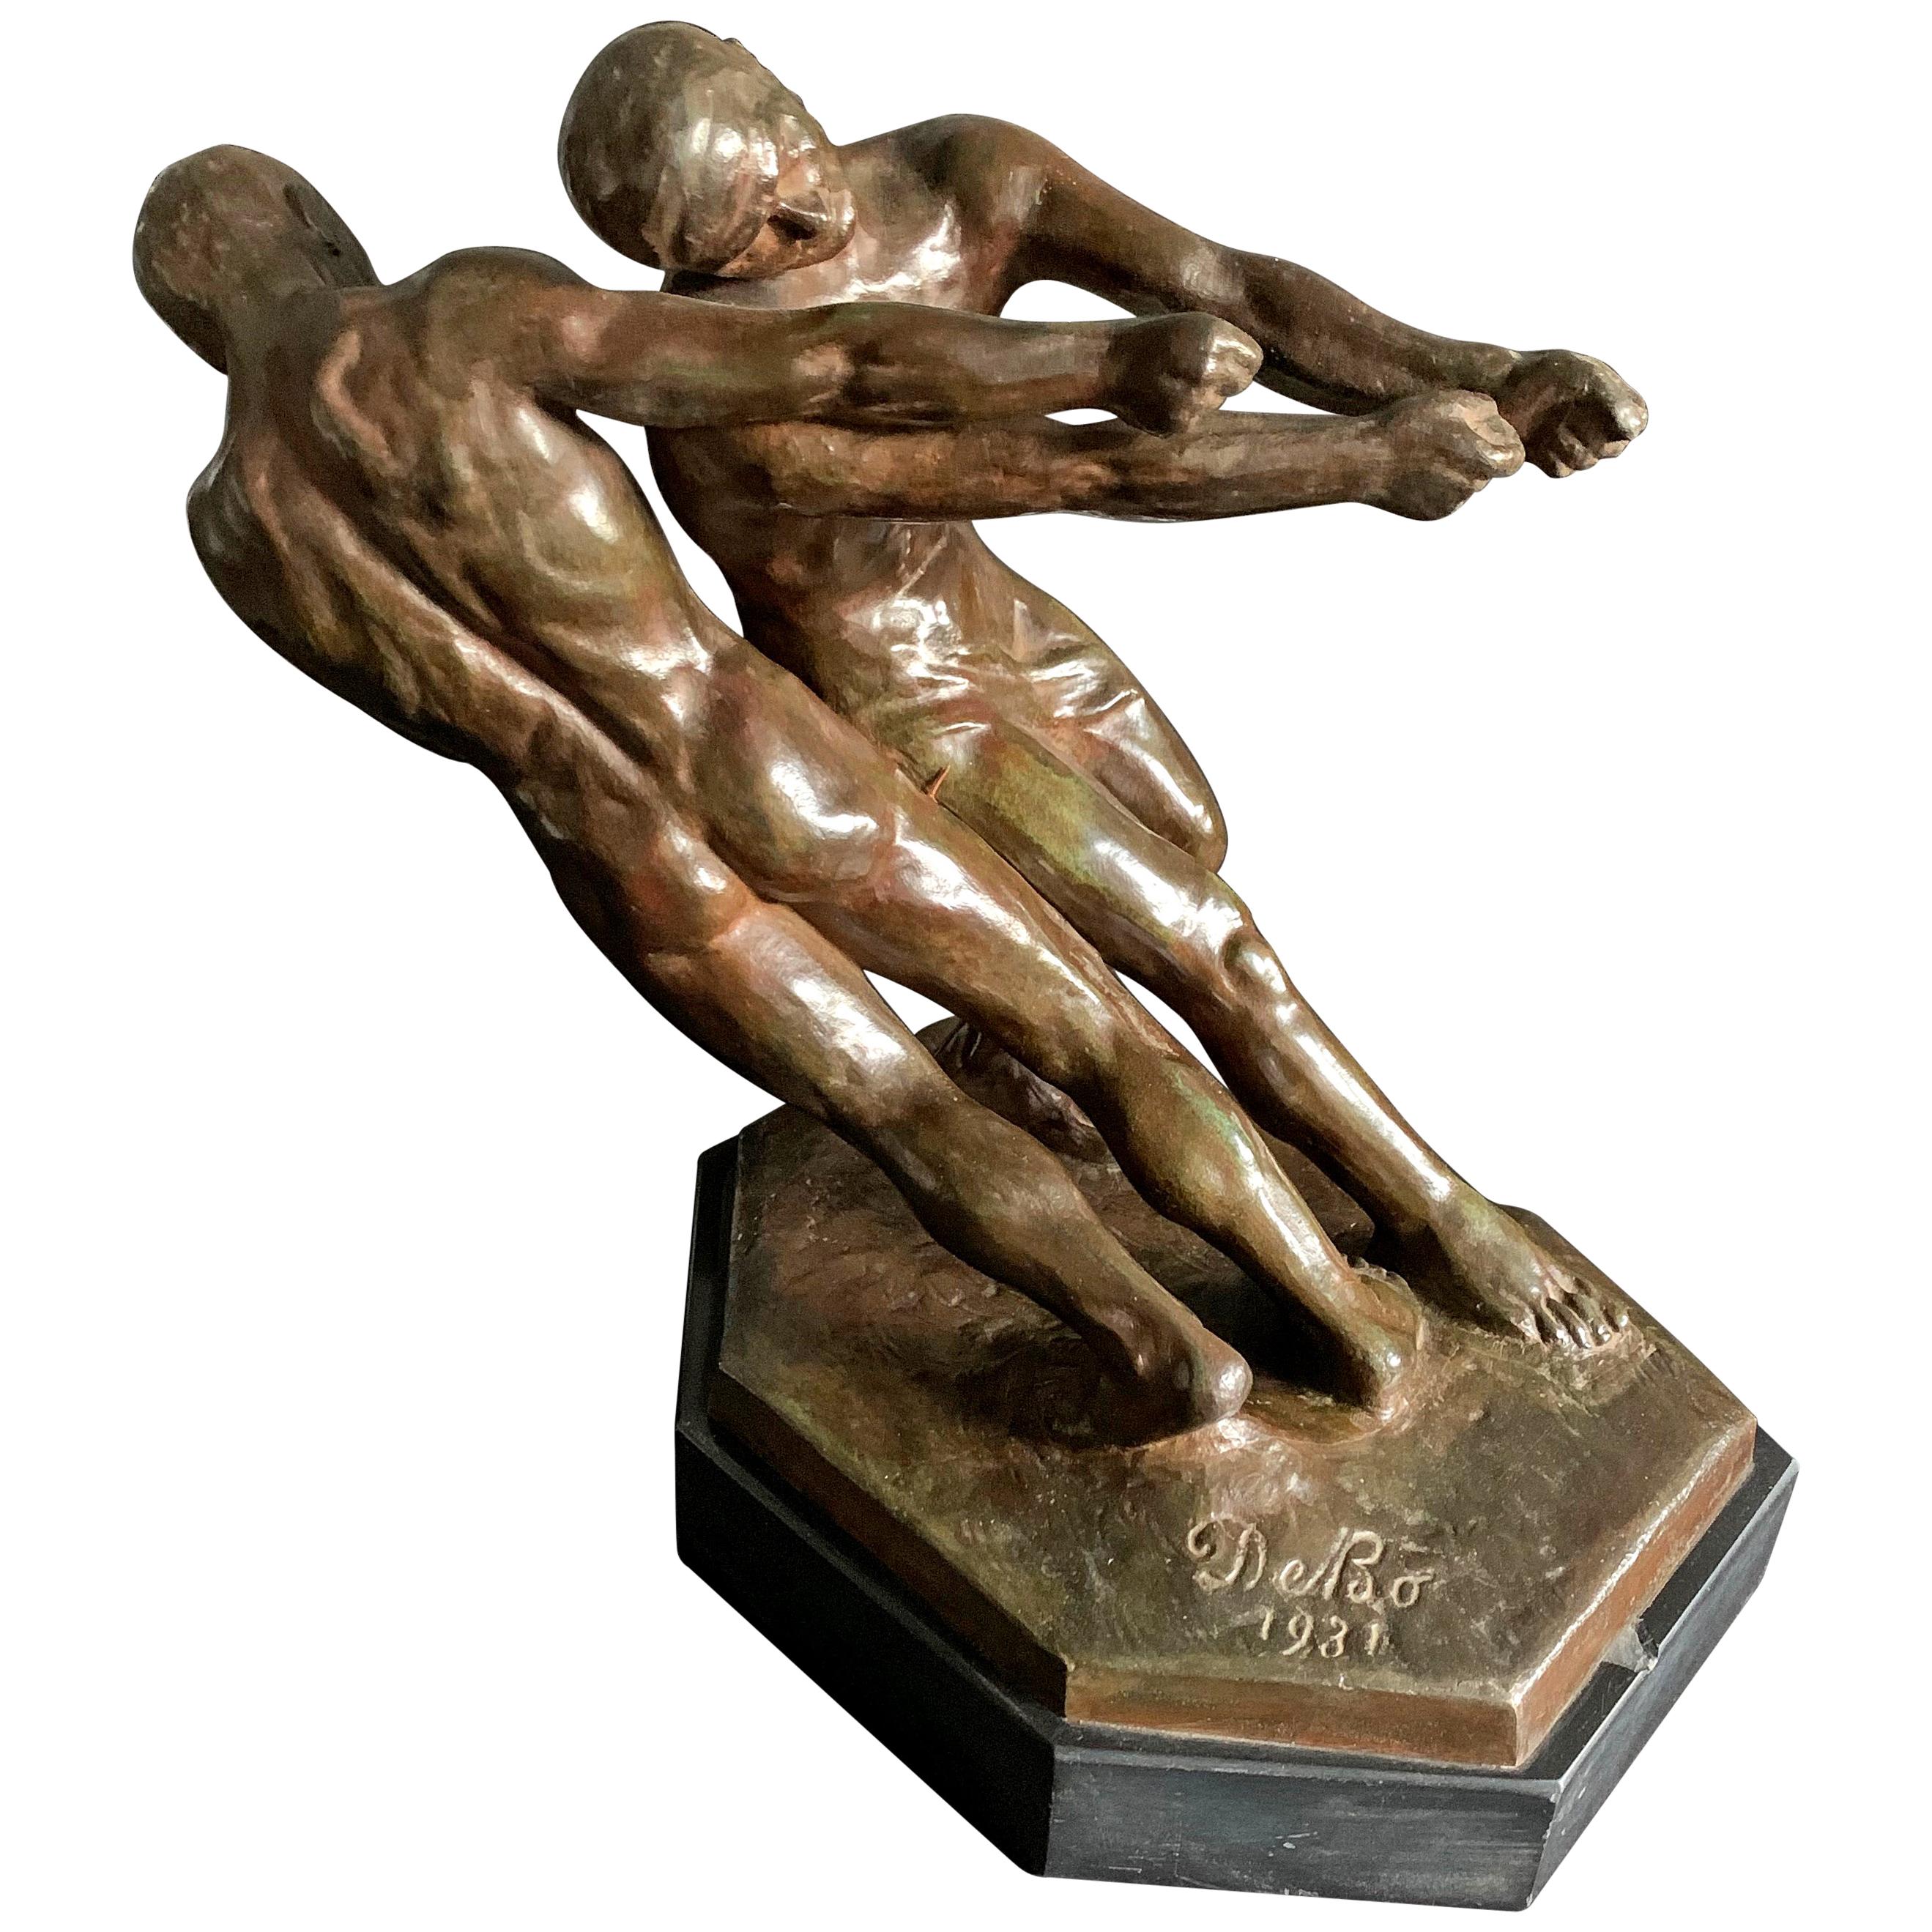 "Hauling In," Possibly Unique Art Deco Bronze Sculpture with Male Nudes, 1931